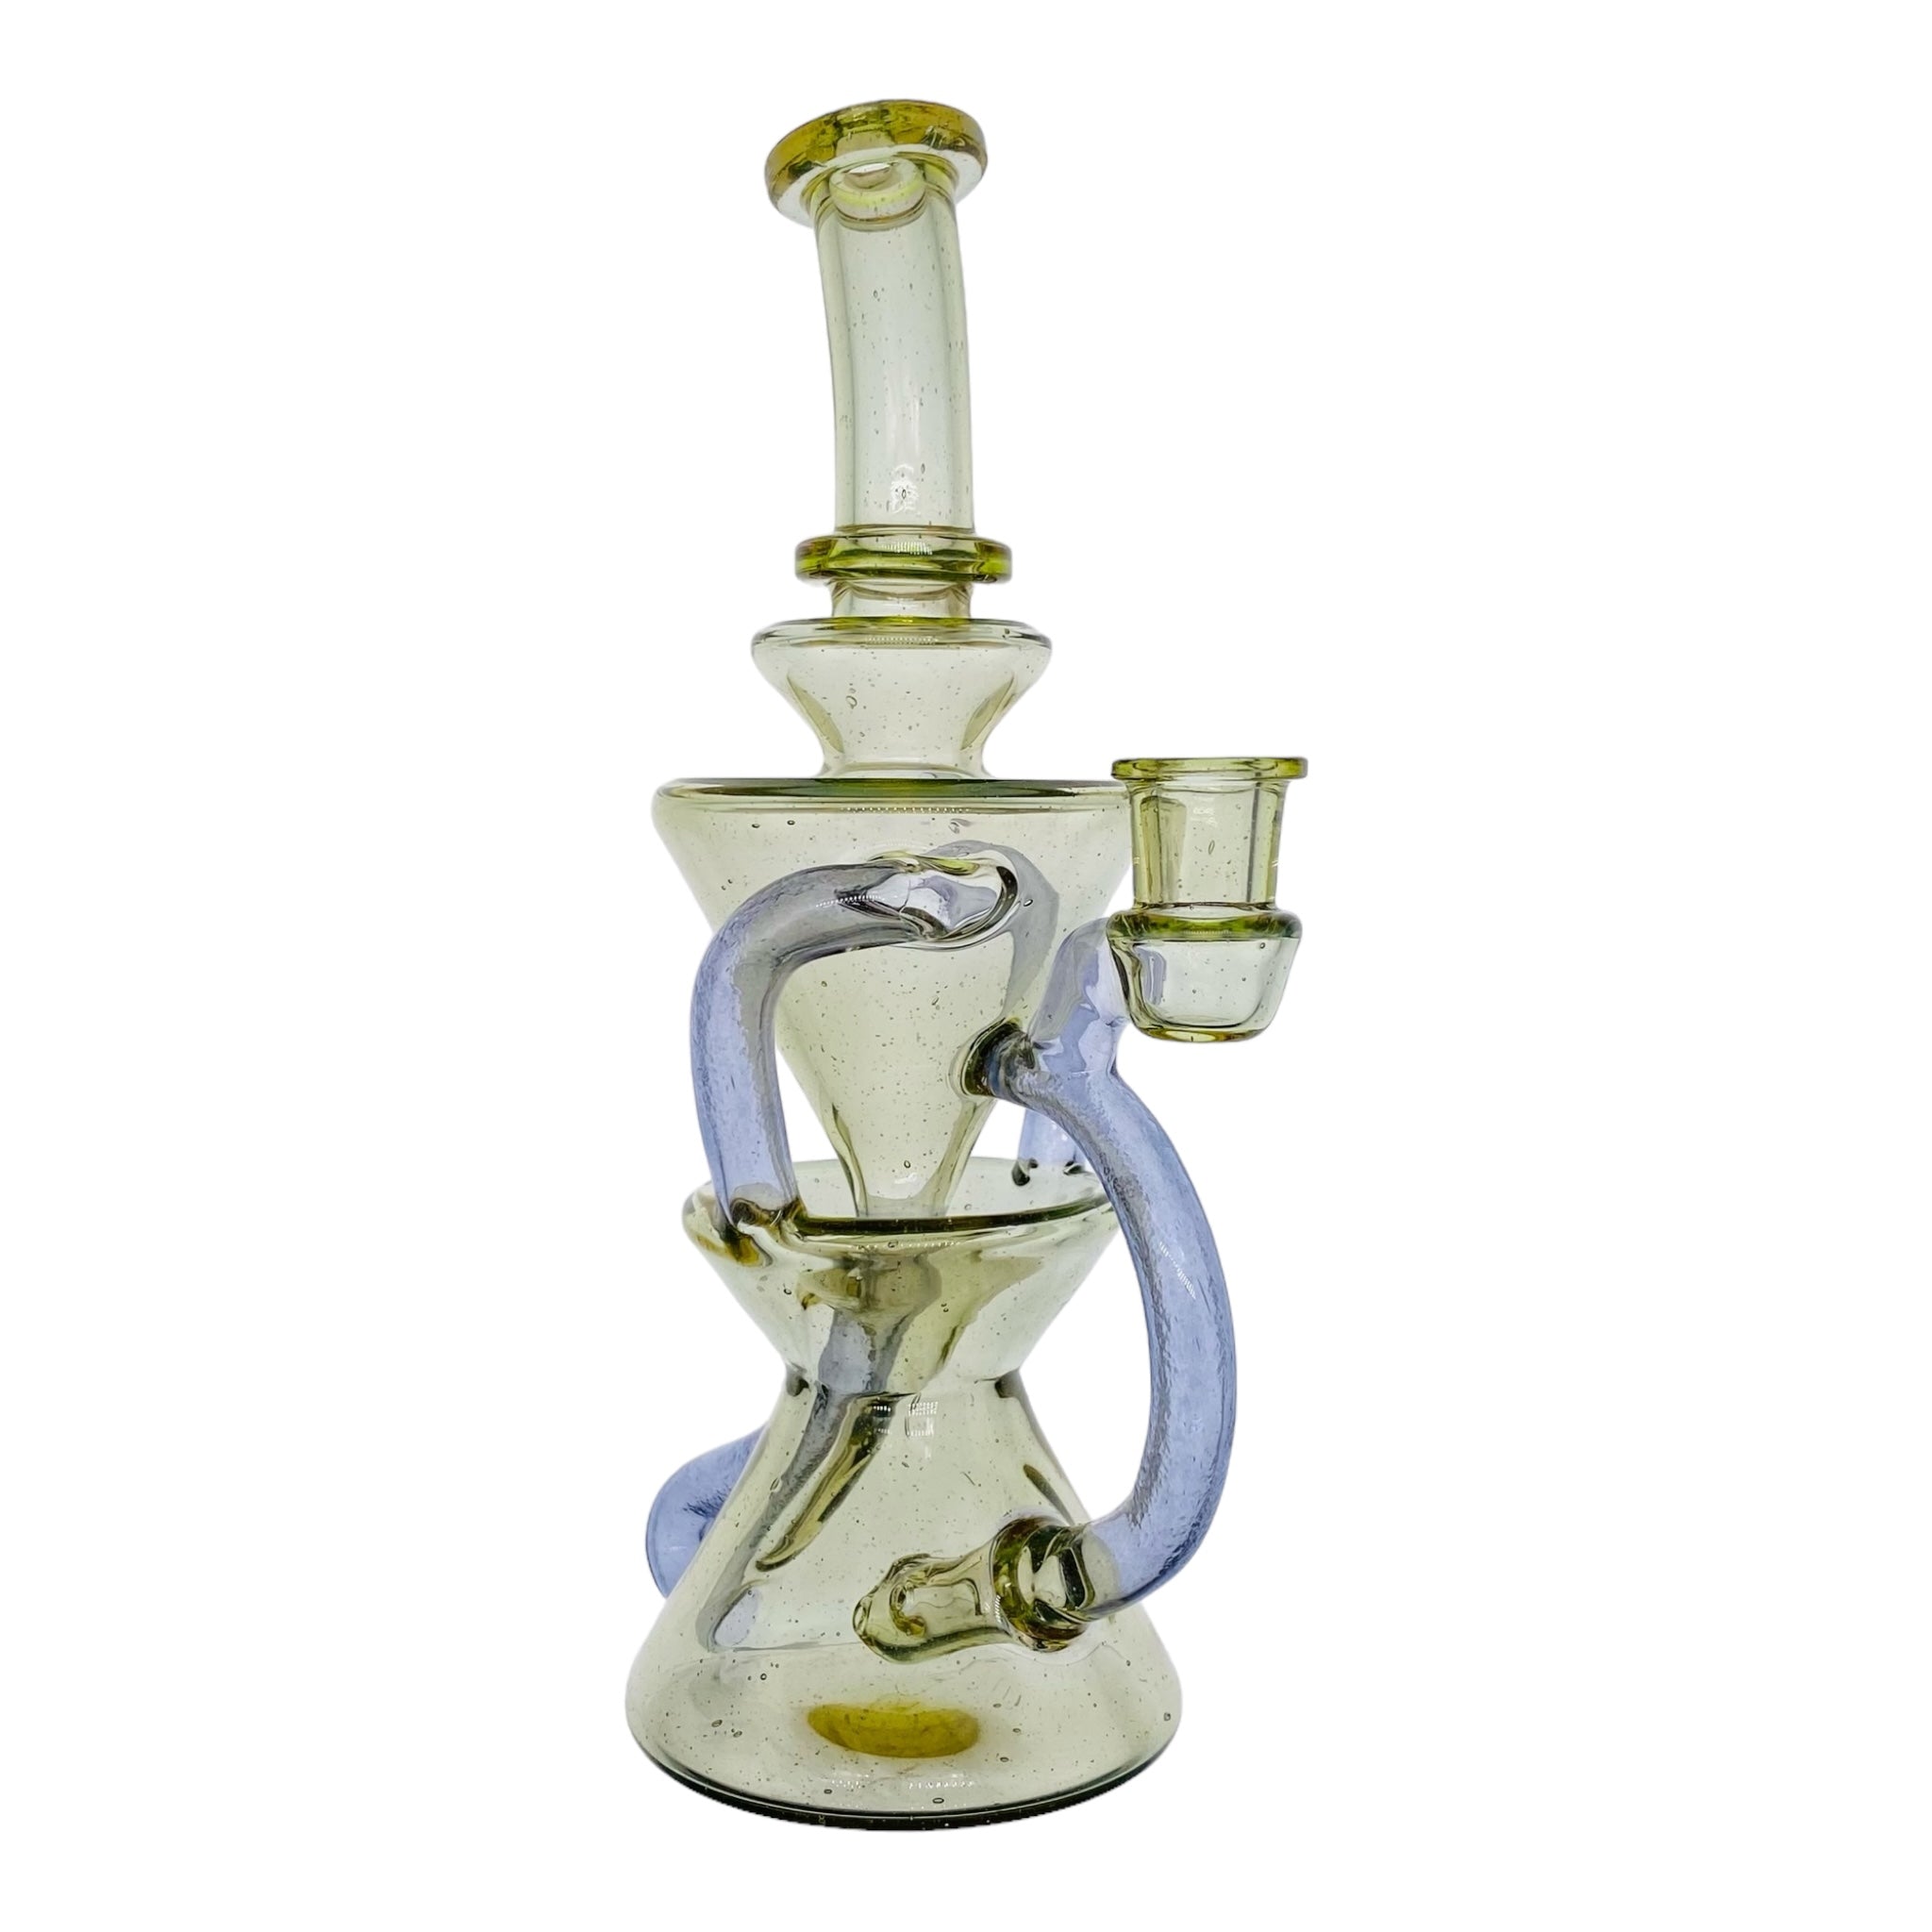 heady glass Captncronic Glass - Double Uptake Recycler Translucent Green With Purple Tubing